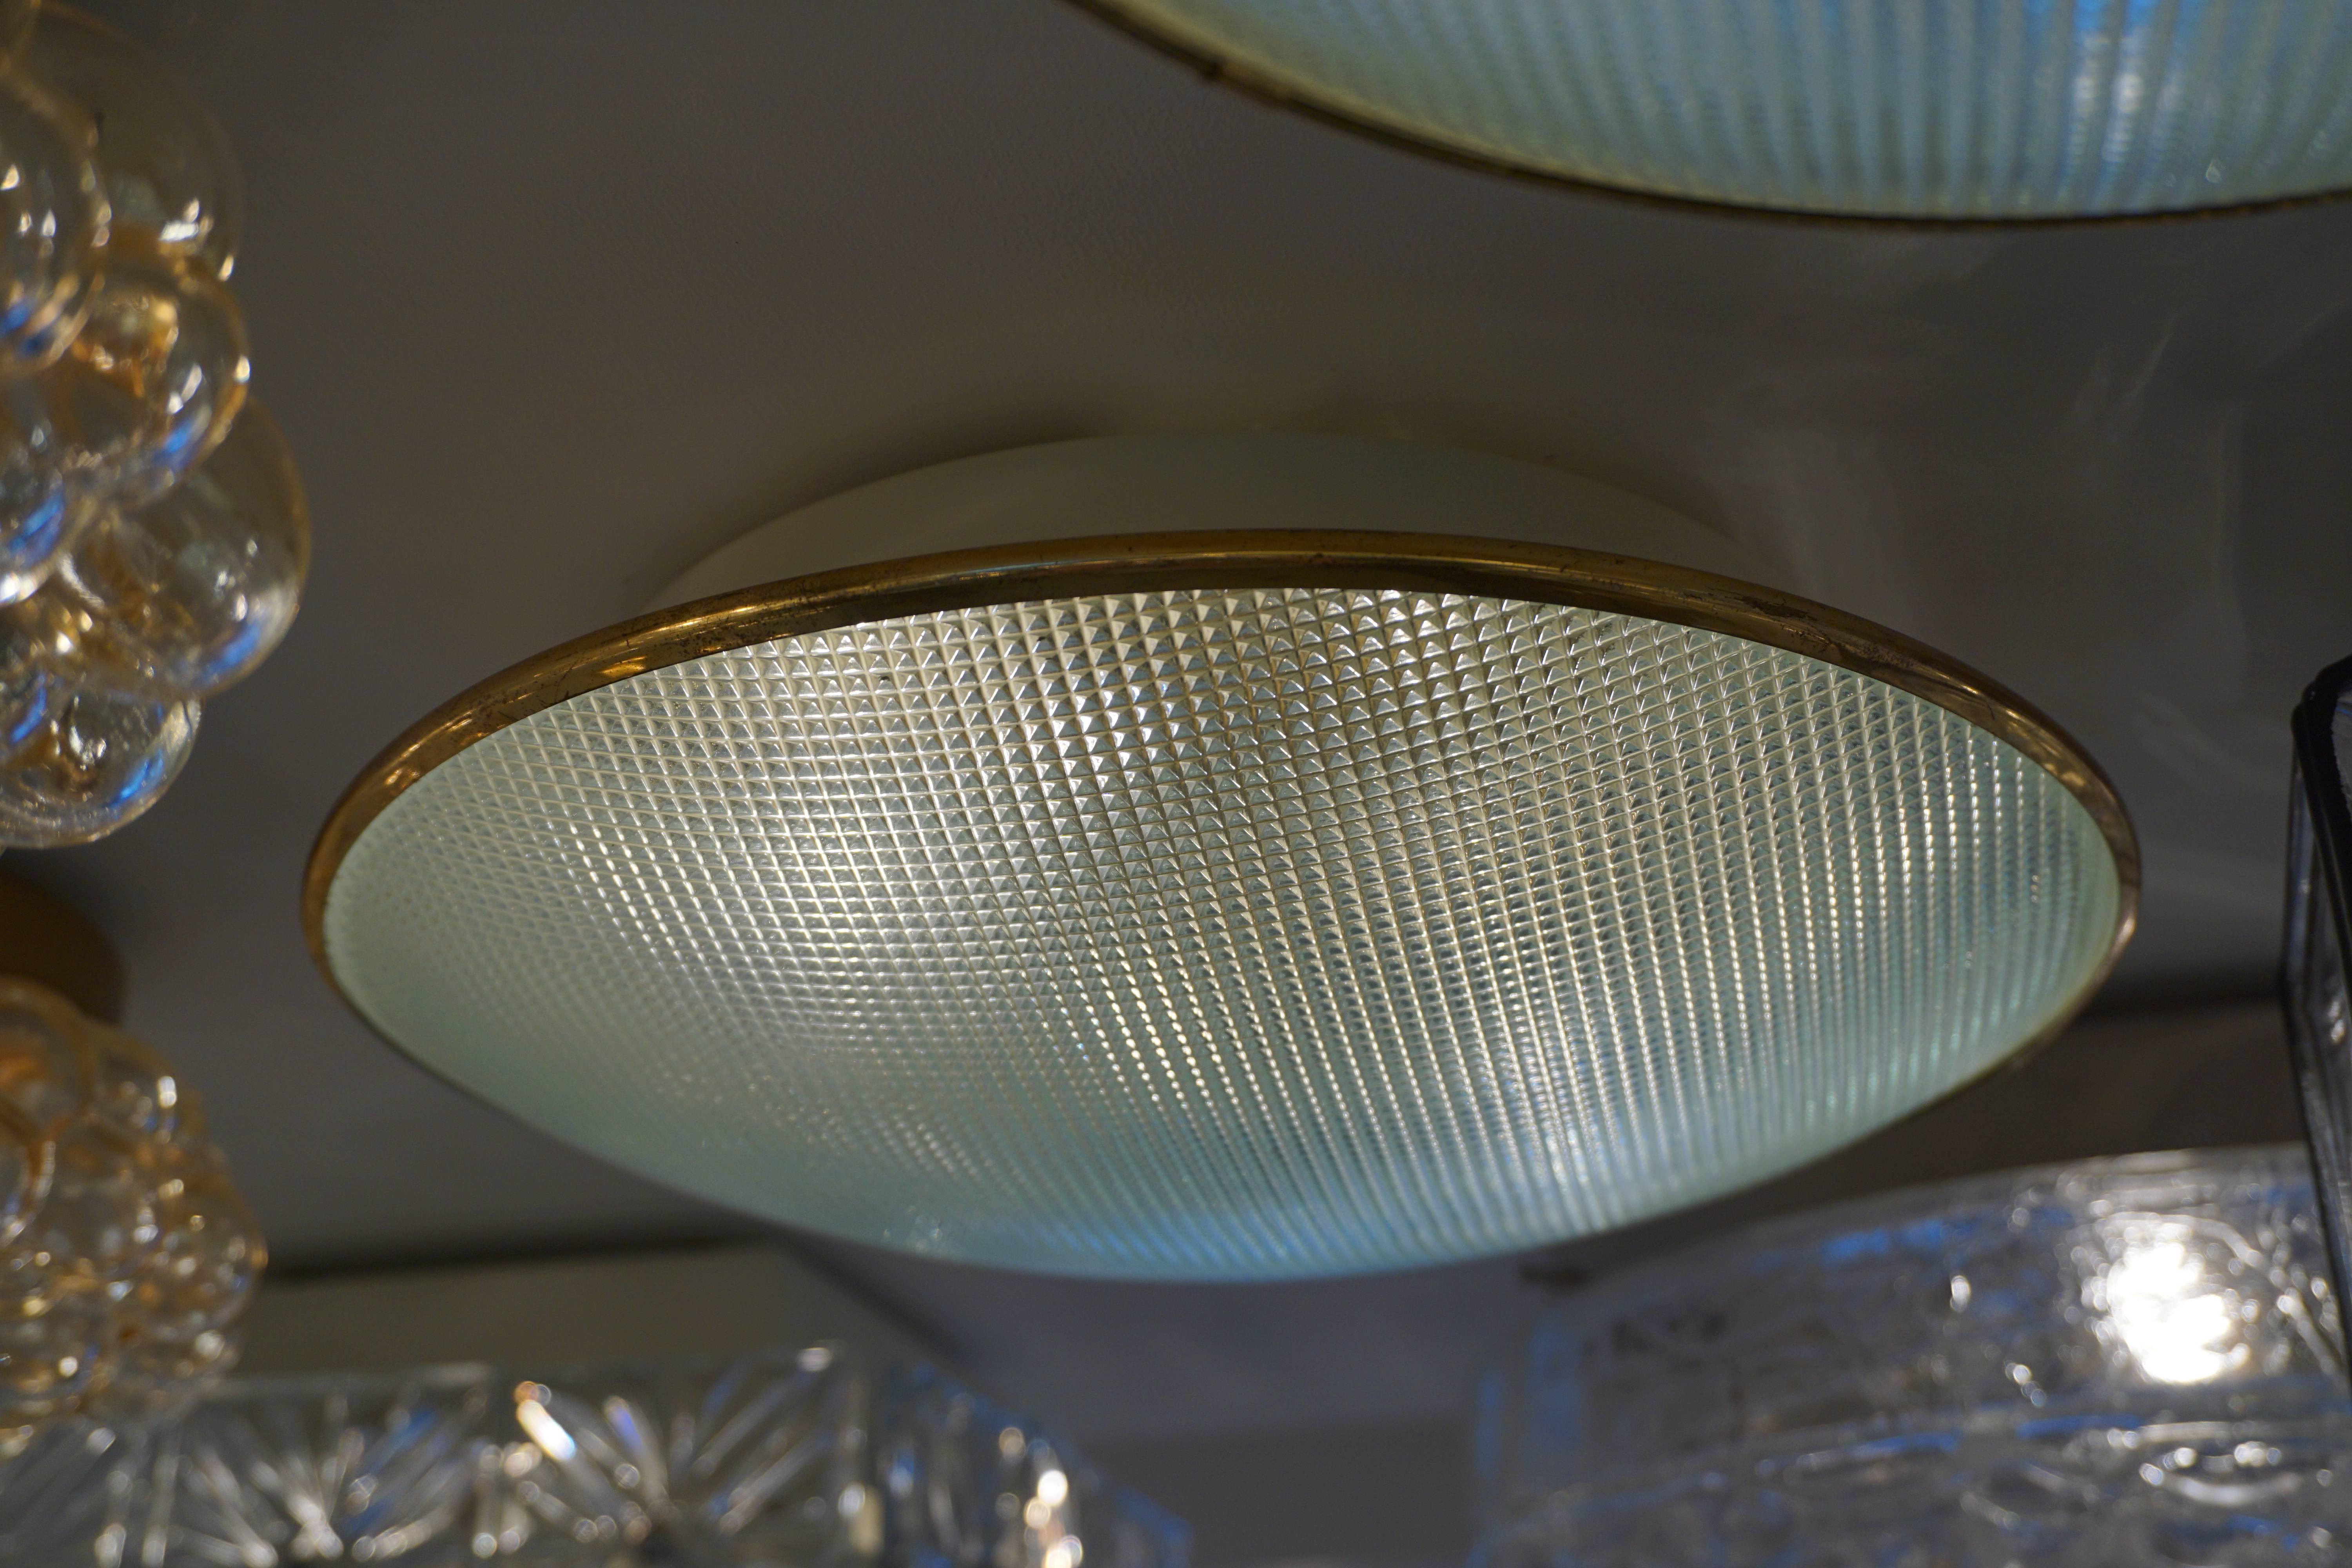 Wonderful flush mount with simple textured glass, brass trim, floating. Newly rewired.